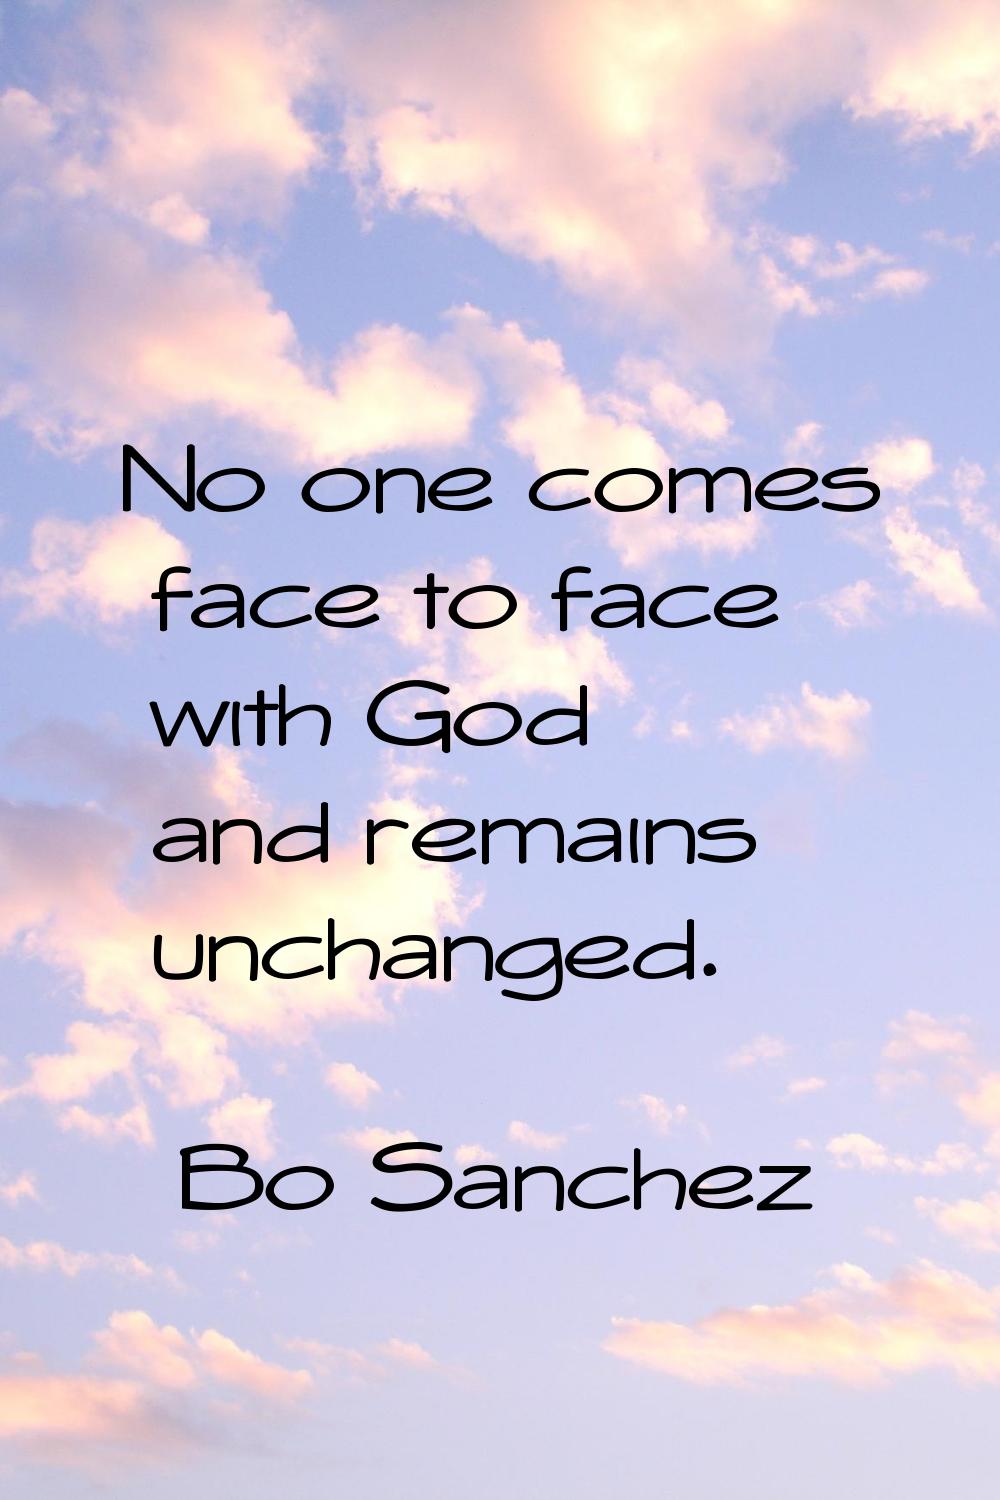 No one comes face to face with God and remains unchanged.